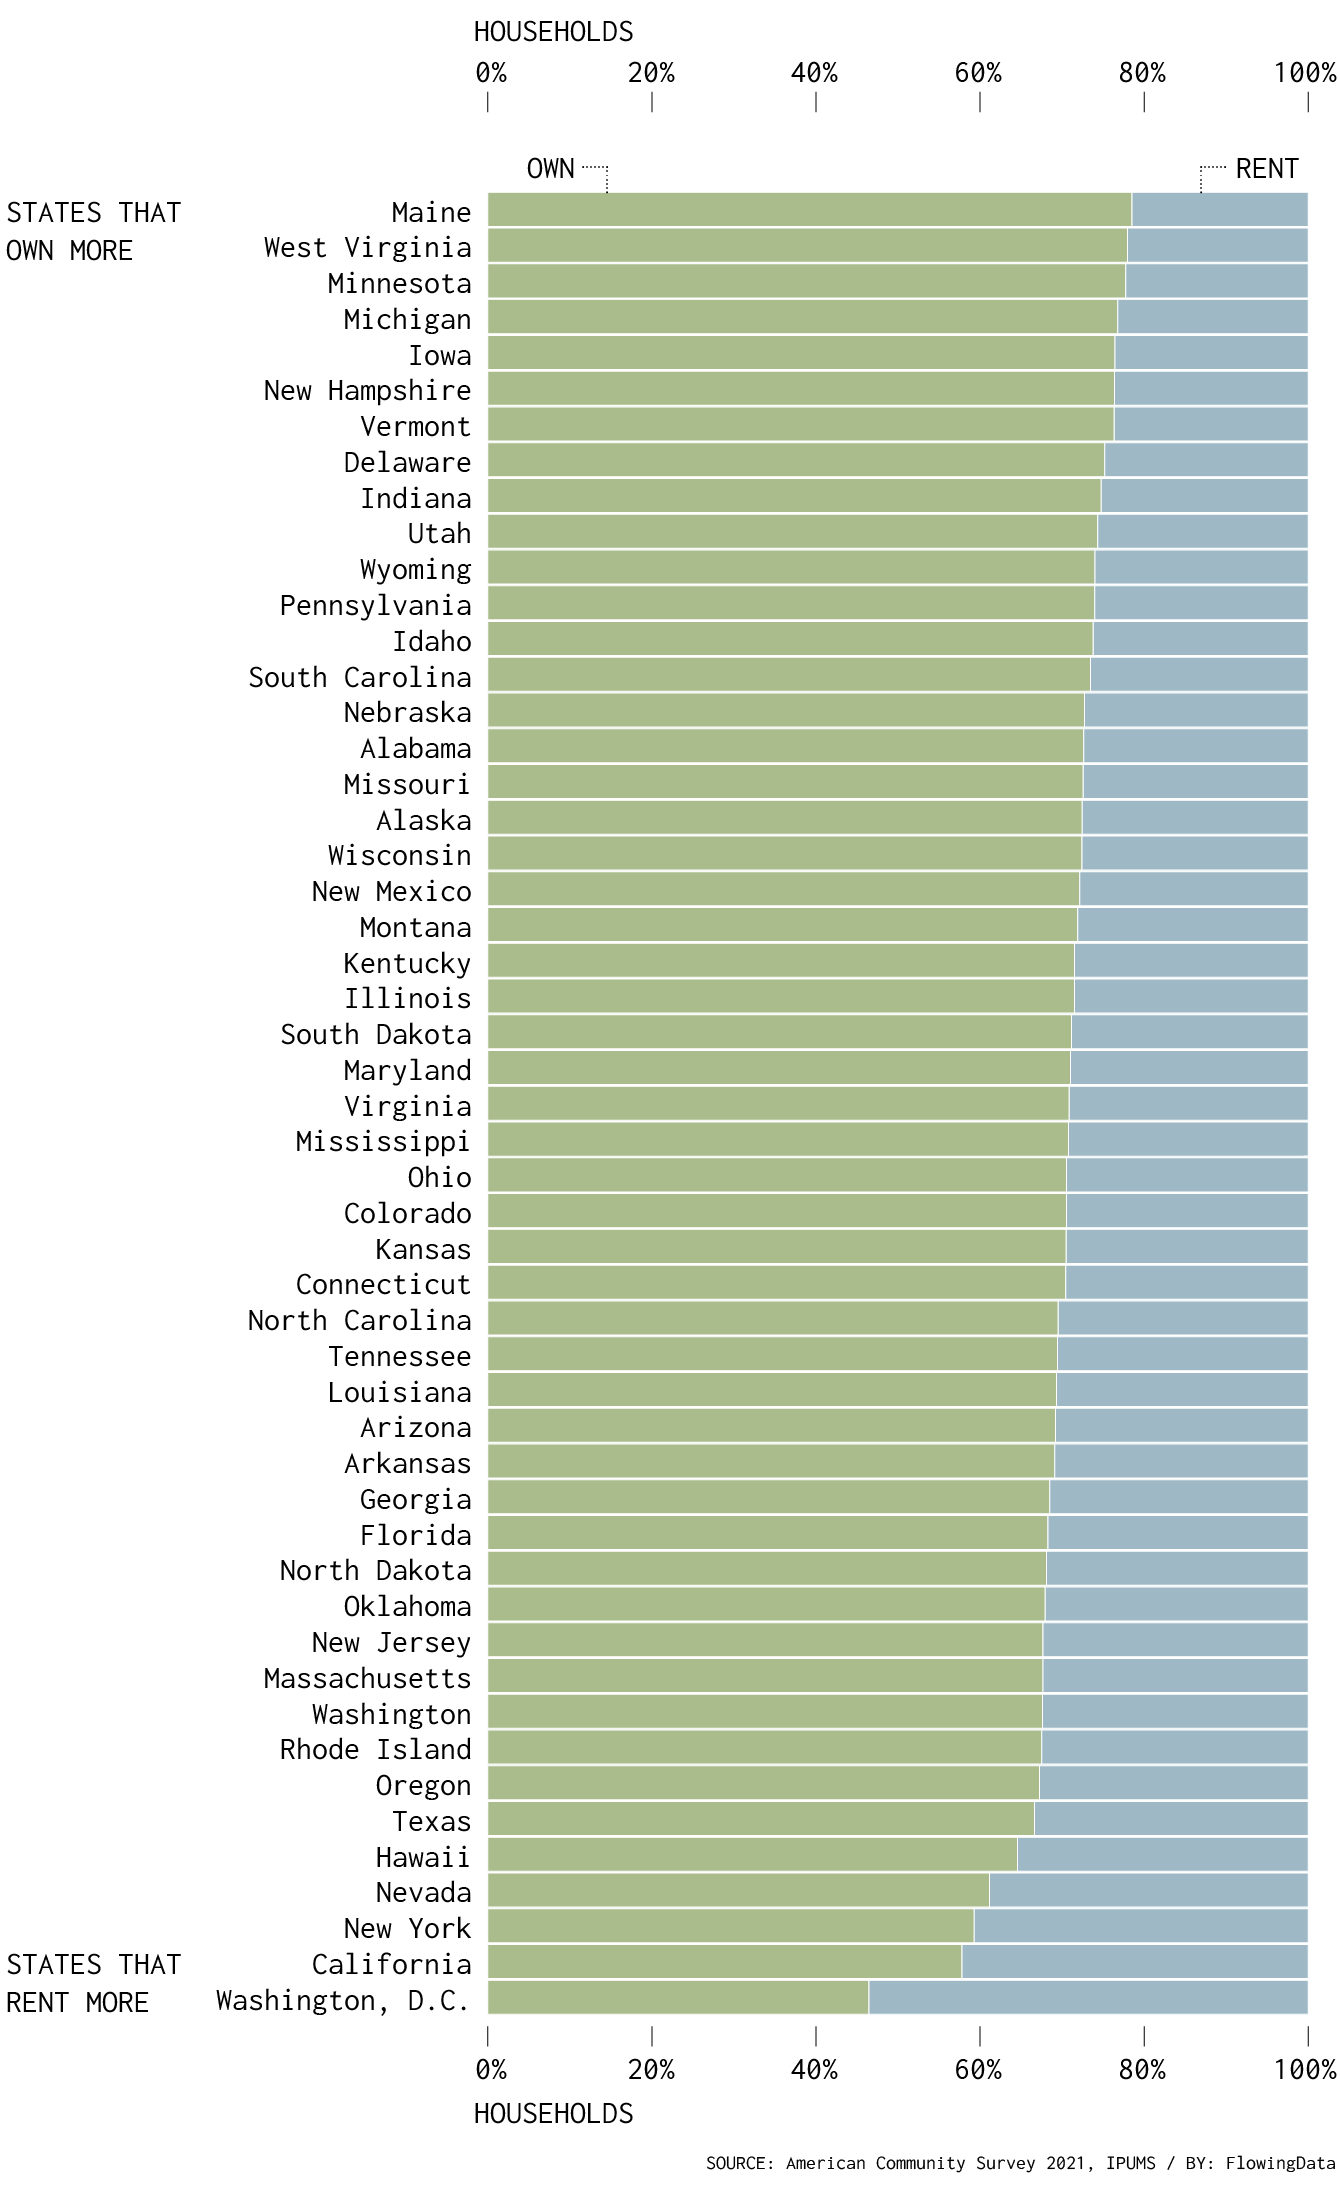 Own and rent by state